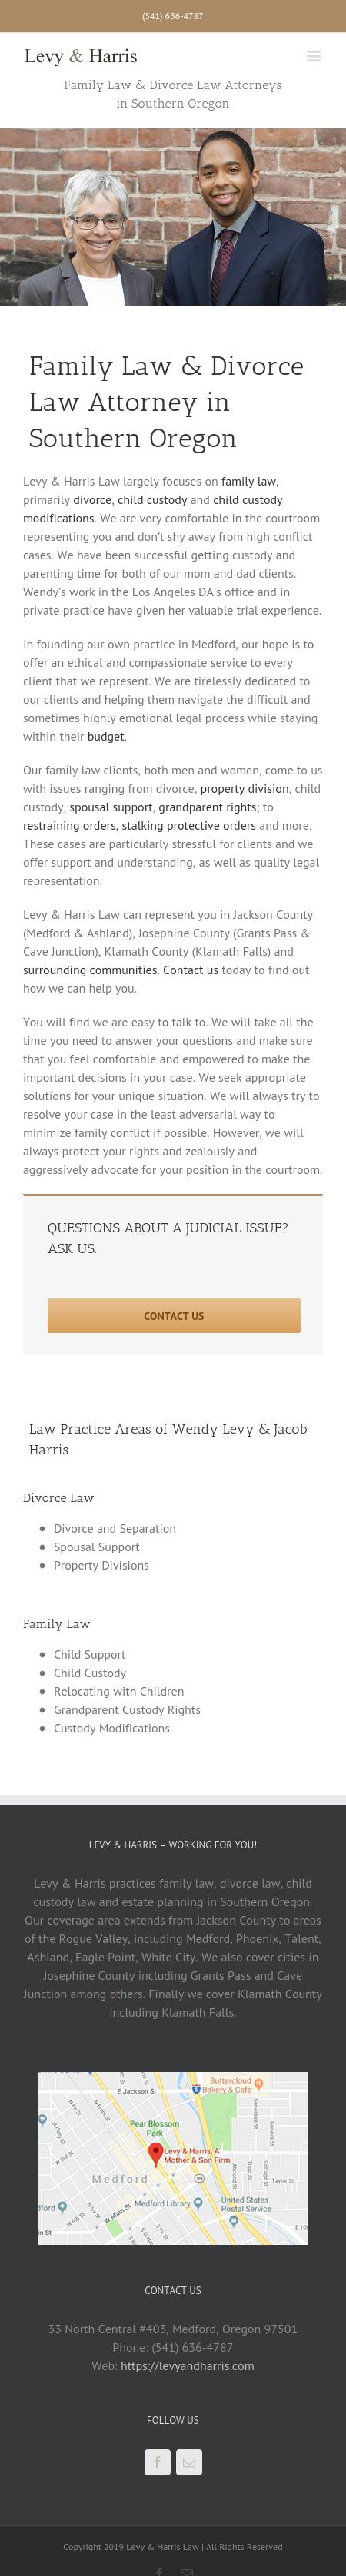 Wendy Levy Family Law Attorney - Eugene OR Lawyers